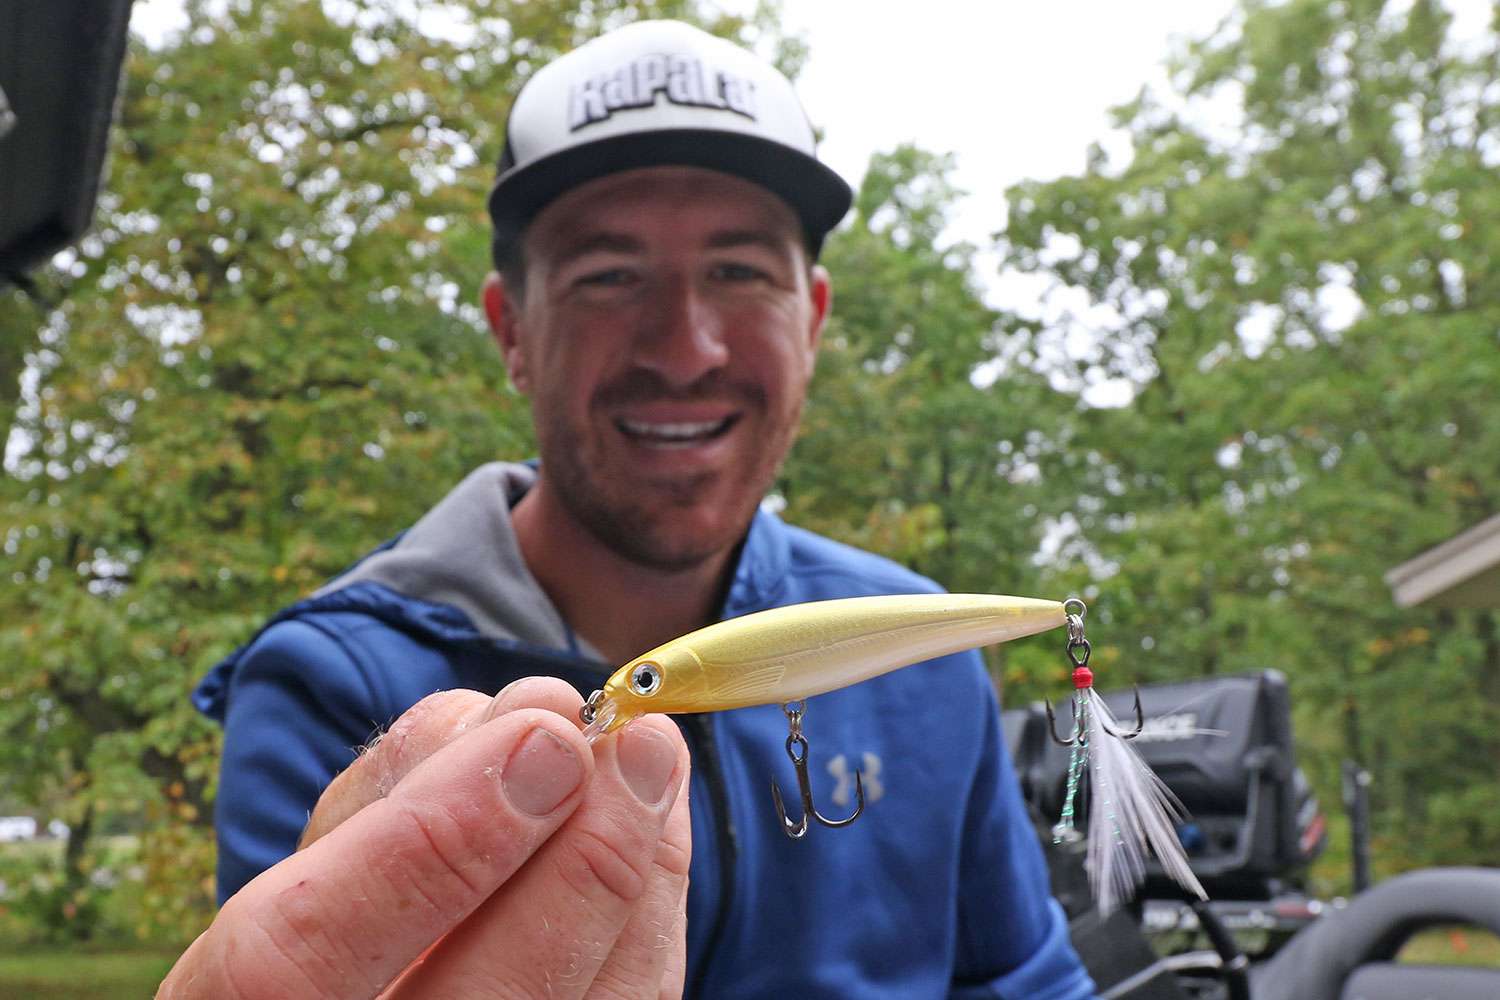 The X-Rap from Rapala is a jerkbait that forces fish to react. He loves it for a number of reasons, especially for northern smallmouth bass during spring and fall when the water temps are cool and fish are feeding heavily. 